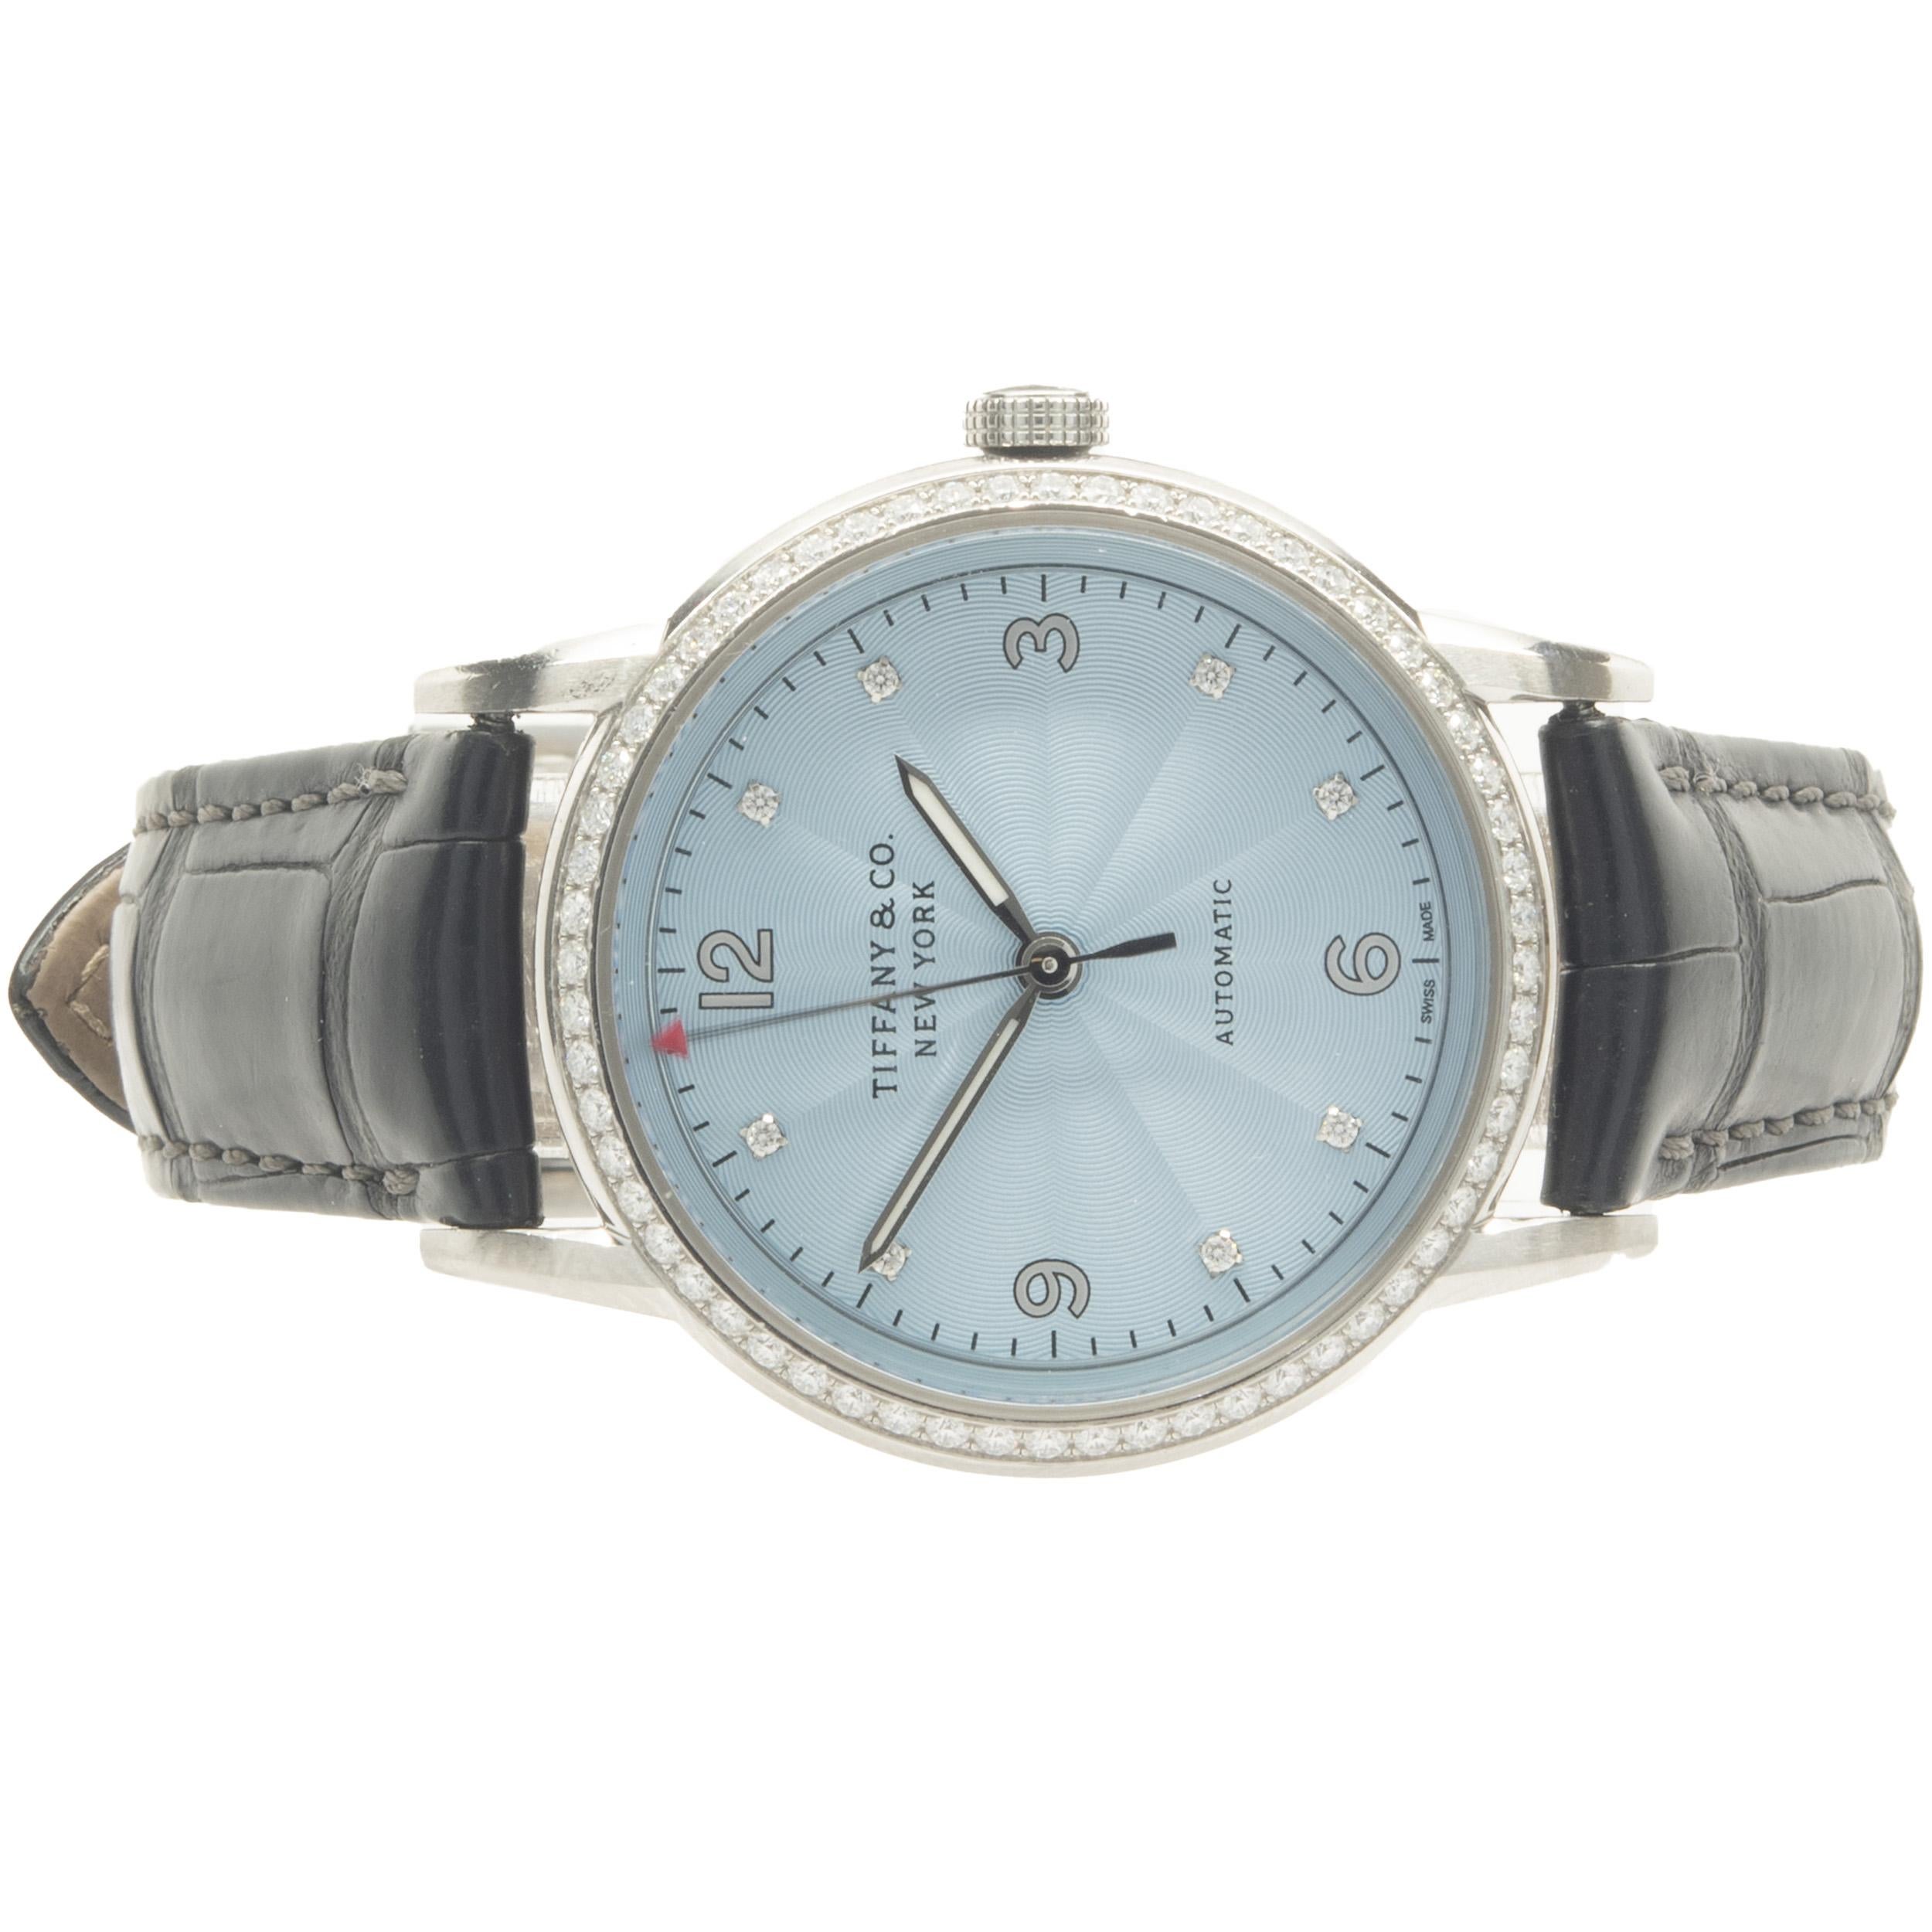 Movement: automatic
Function: hours, minutes, seconds
Case: 34mm round stainless steel case, sapphire crystal, push/pull crown, diamond bezel
Band: blue leather strap, integrated clasp
Dial: blue sunburst, diamond numerals
Serial#: